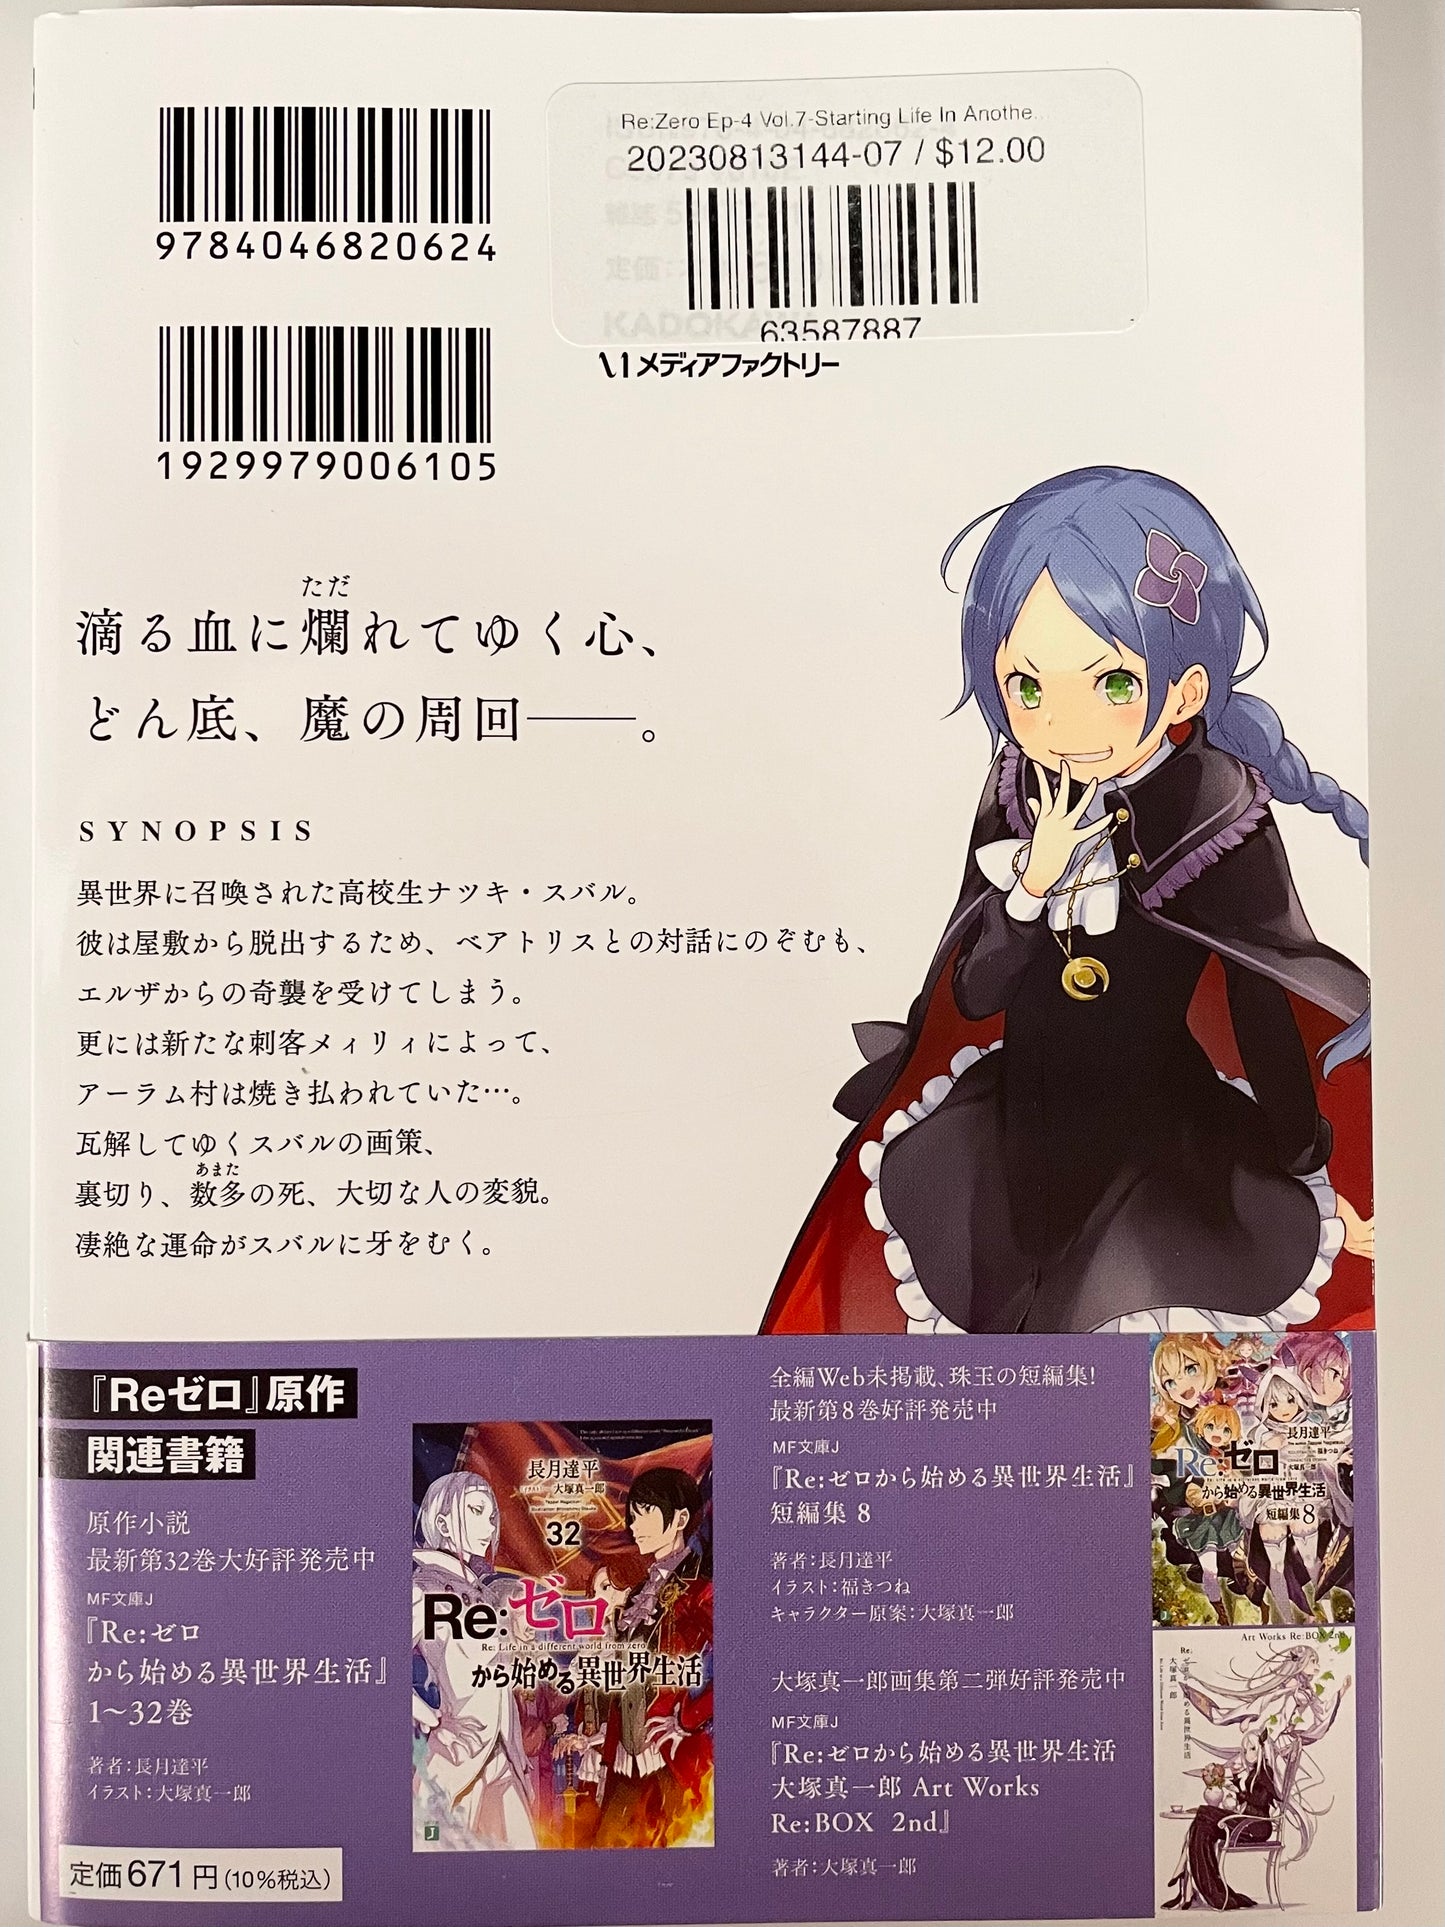 Re:Zero Ep-4 Vol.7-Starting Life In Another World-Official Japanese Edition